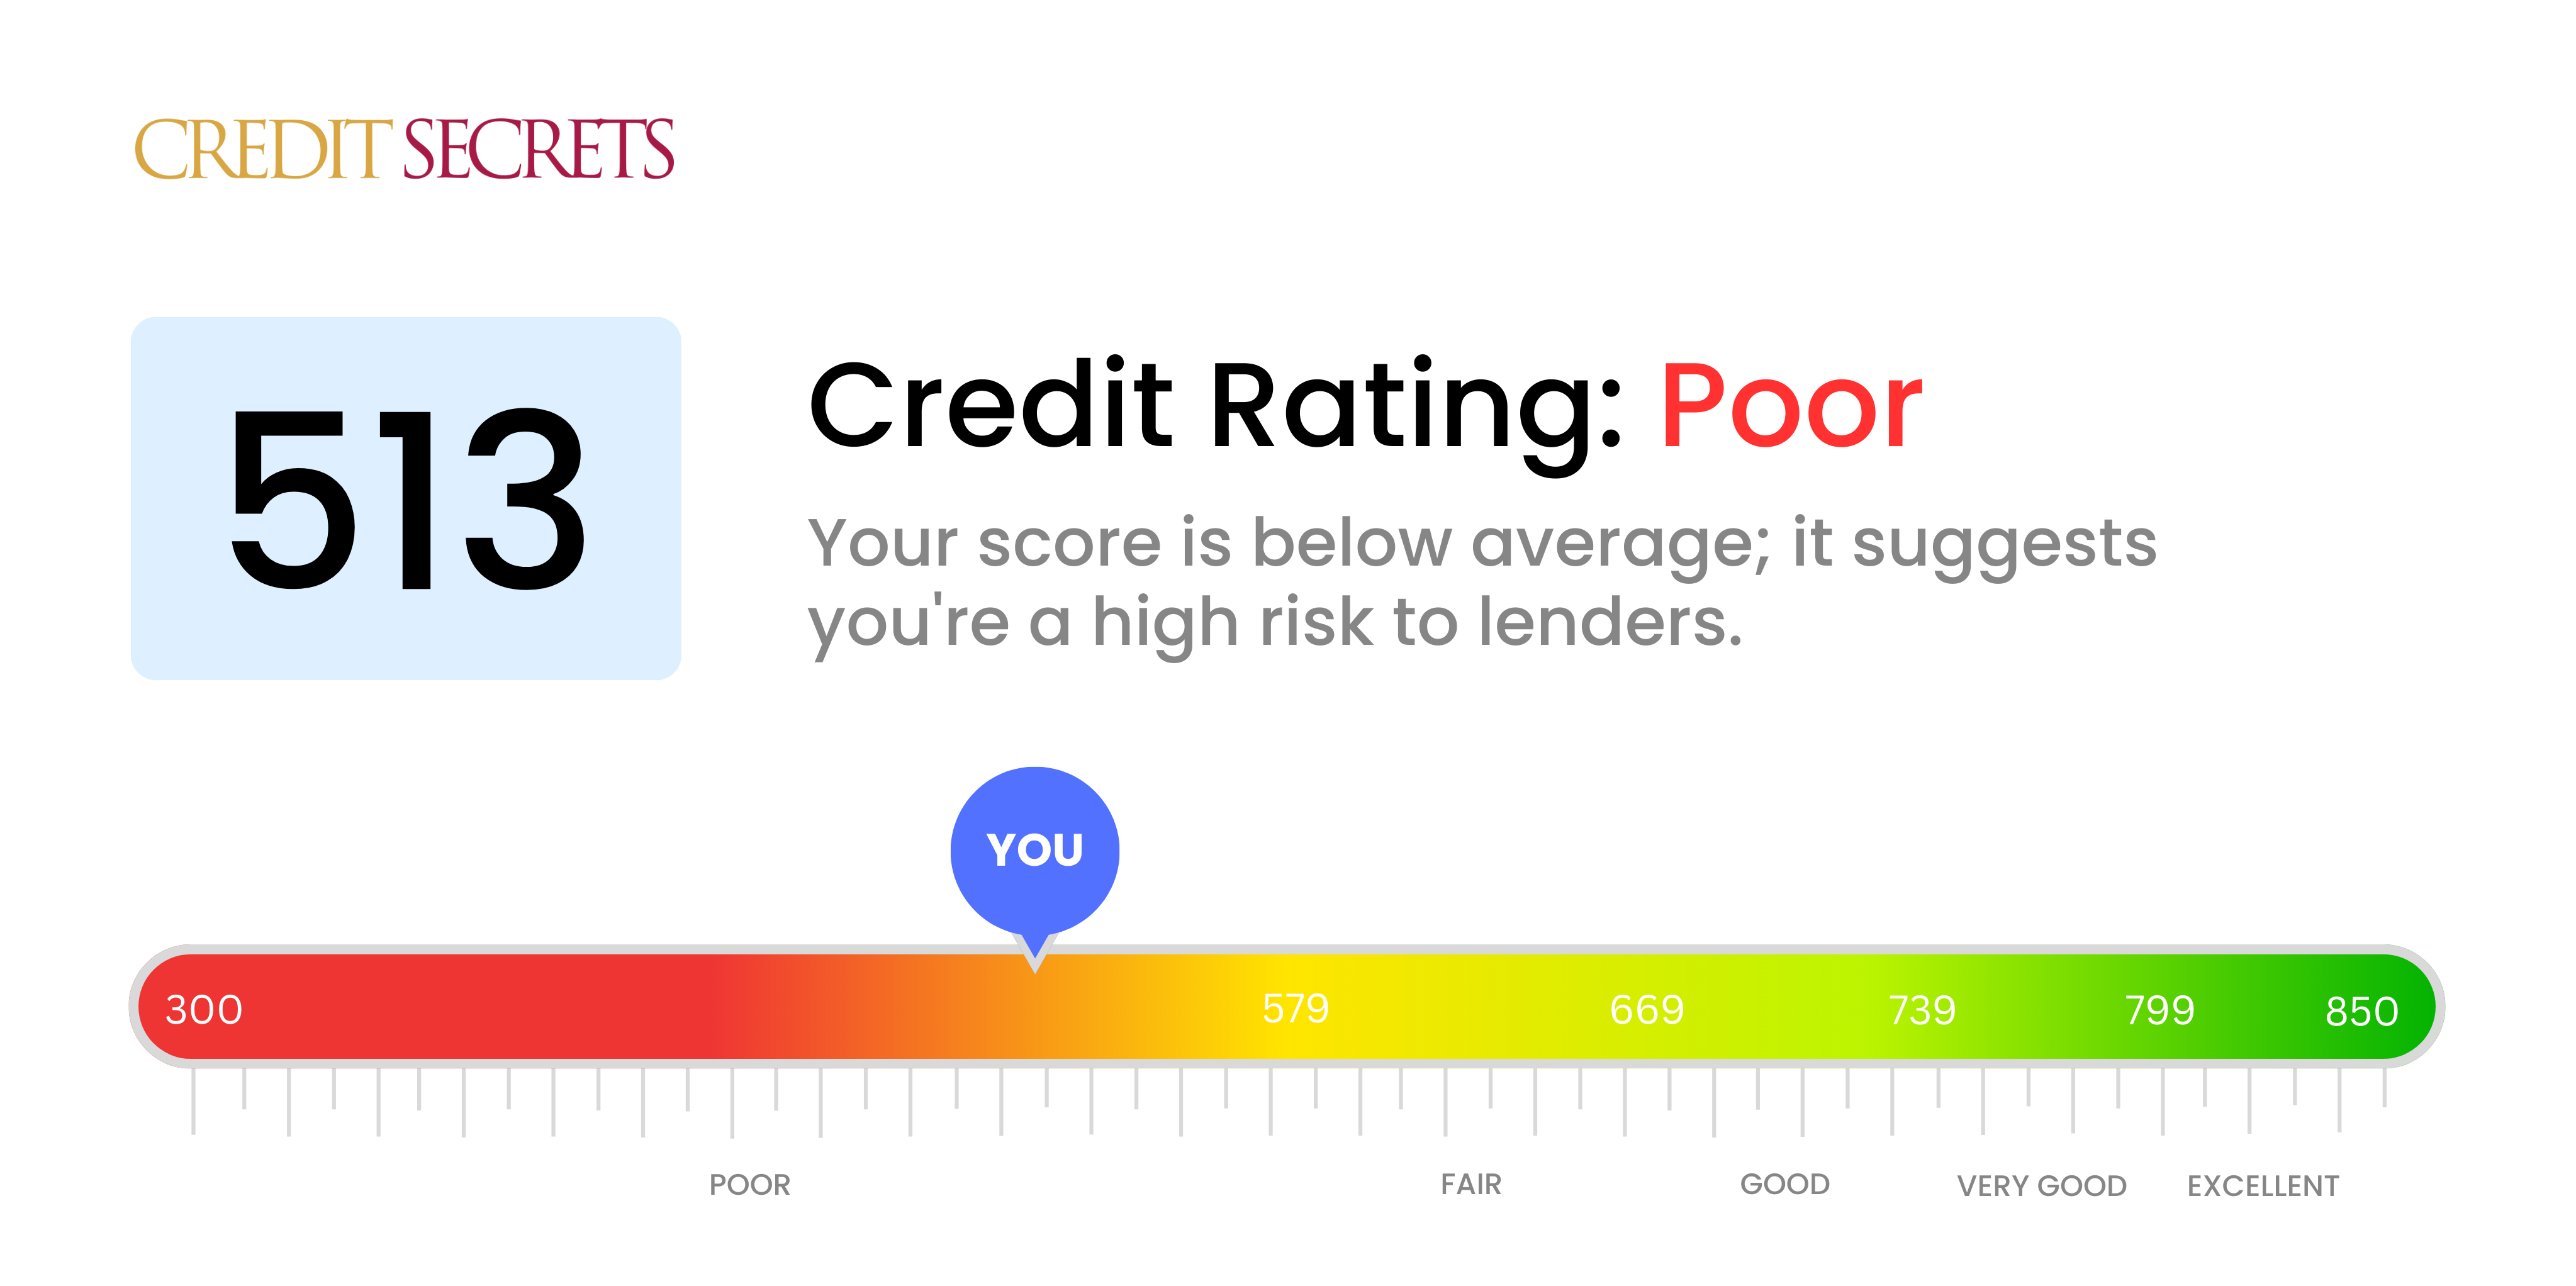 Is 513 a good credit score?